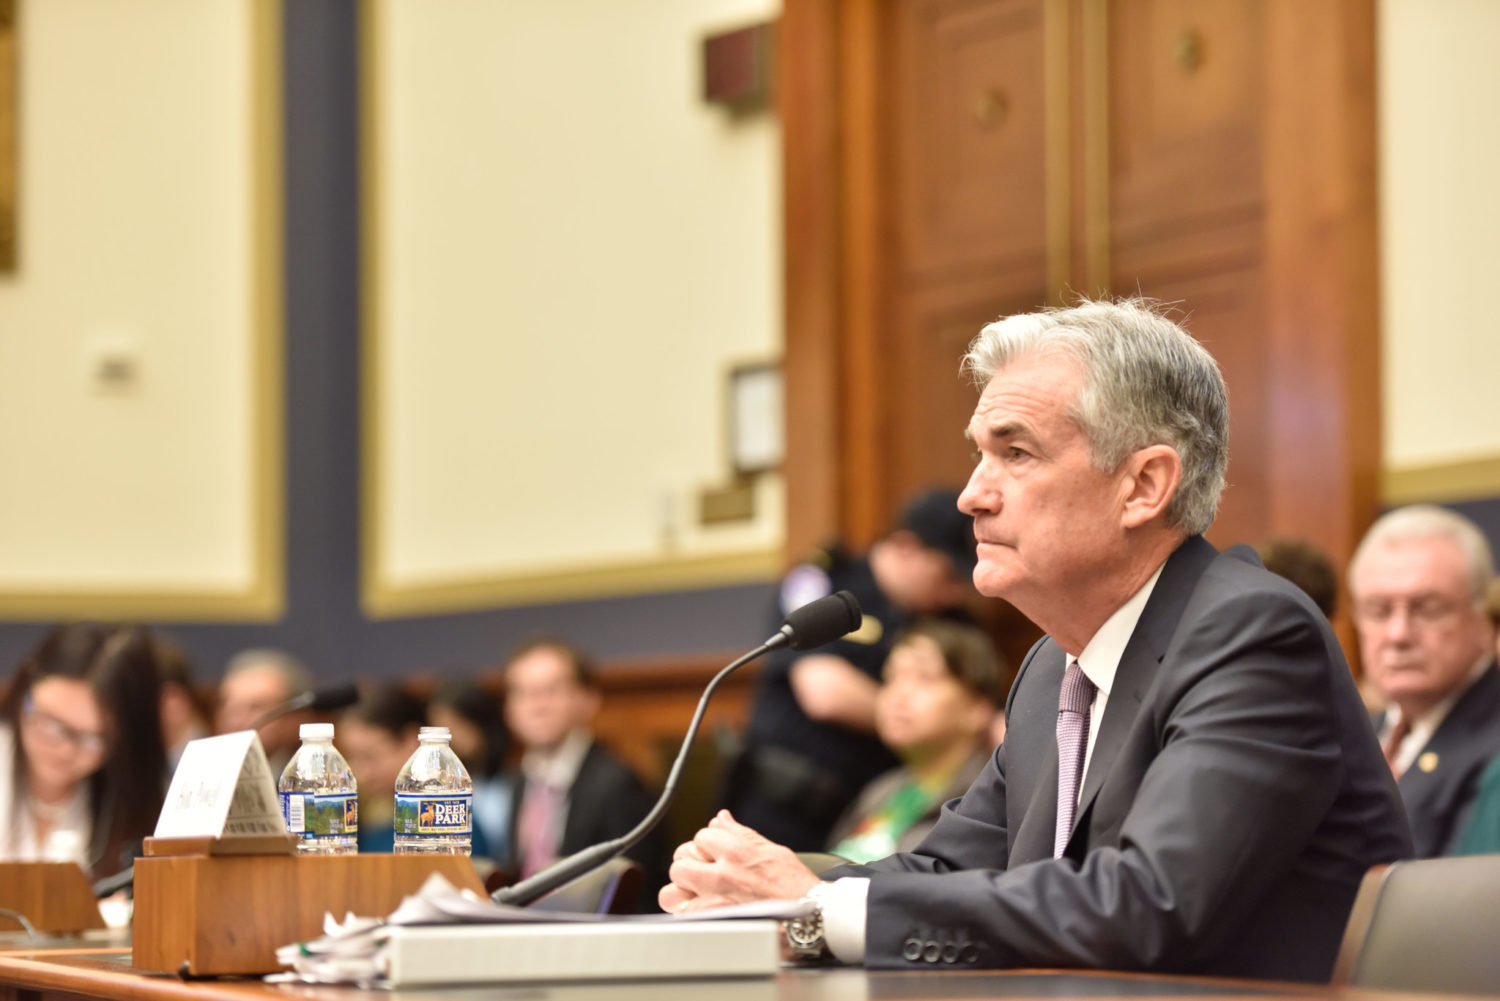 Could-a-digital-dollar-compete-on-privacy?-fed-chairman-powell-hints-it-might